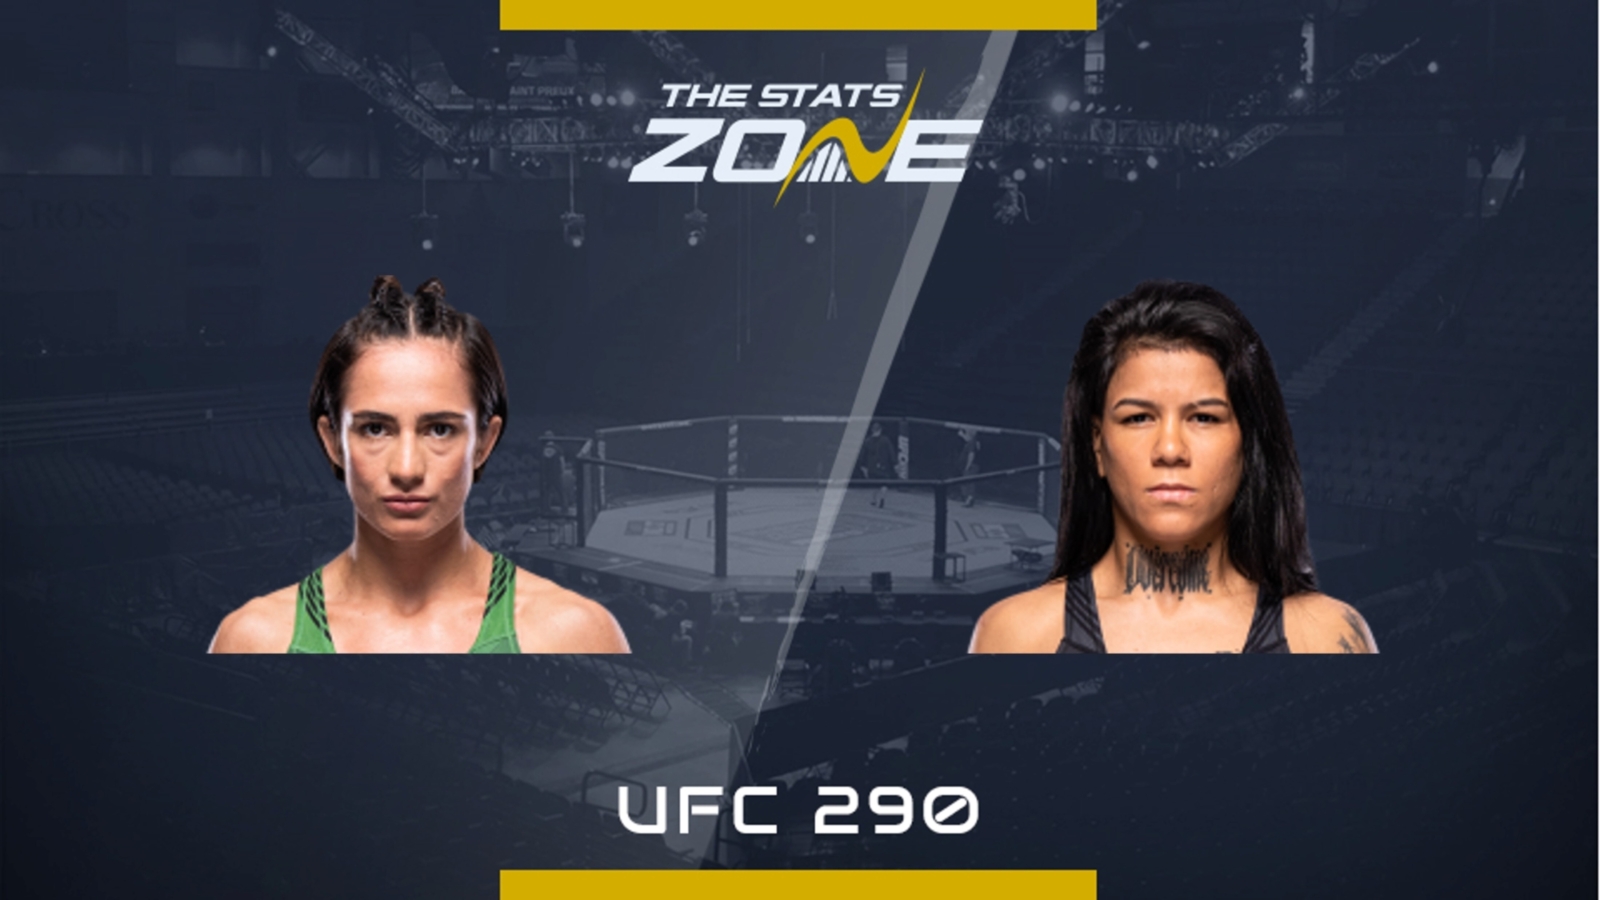 MMA Preview – Yazmin Jauregui vs Denise Gomes at UFC 290 - The Stats Zone